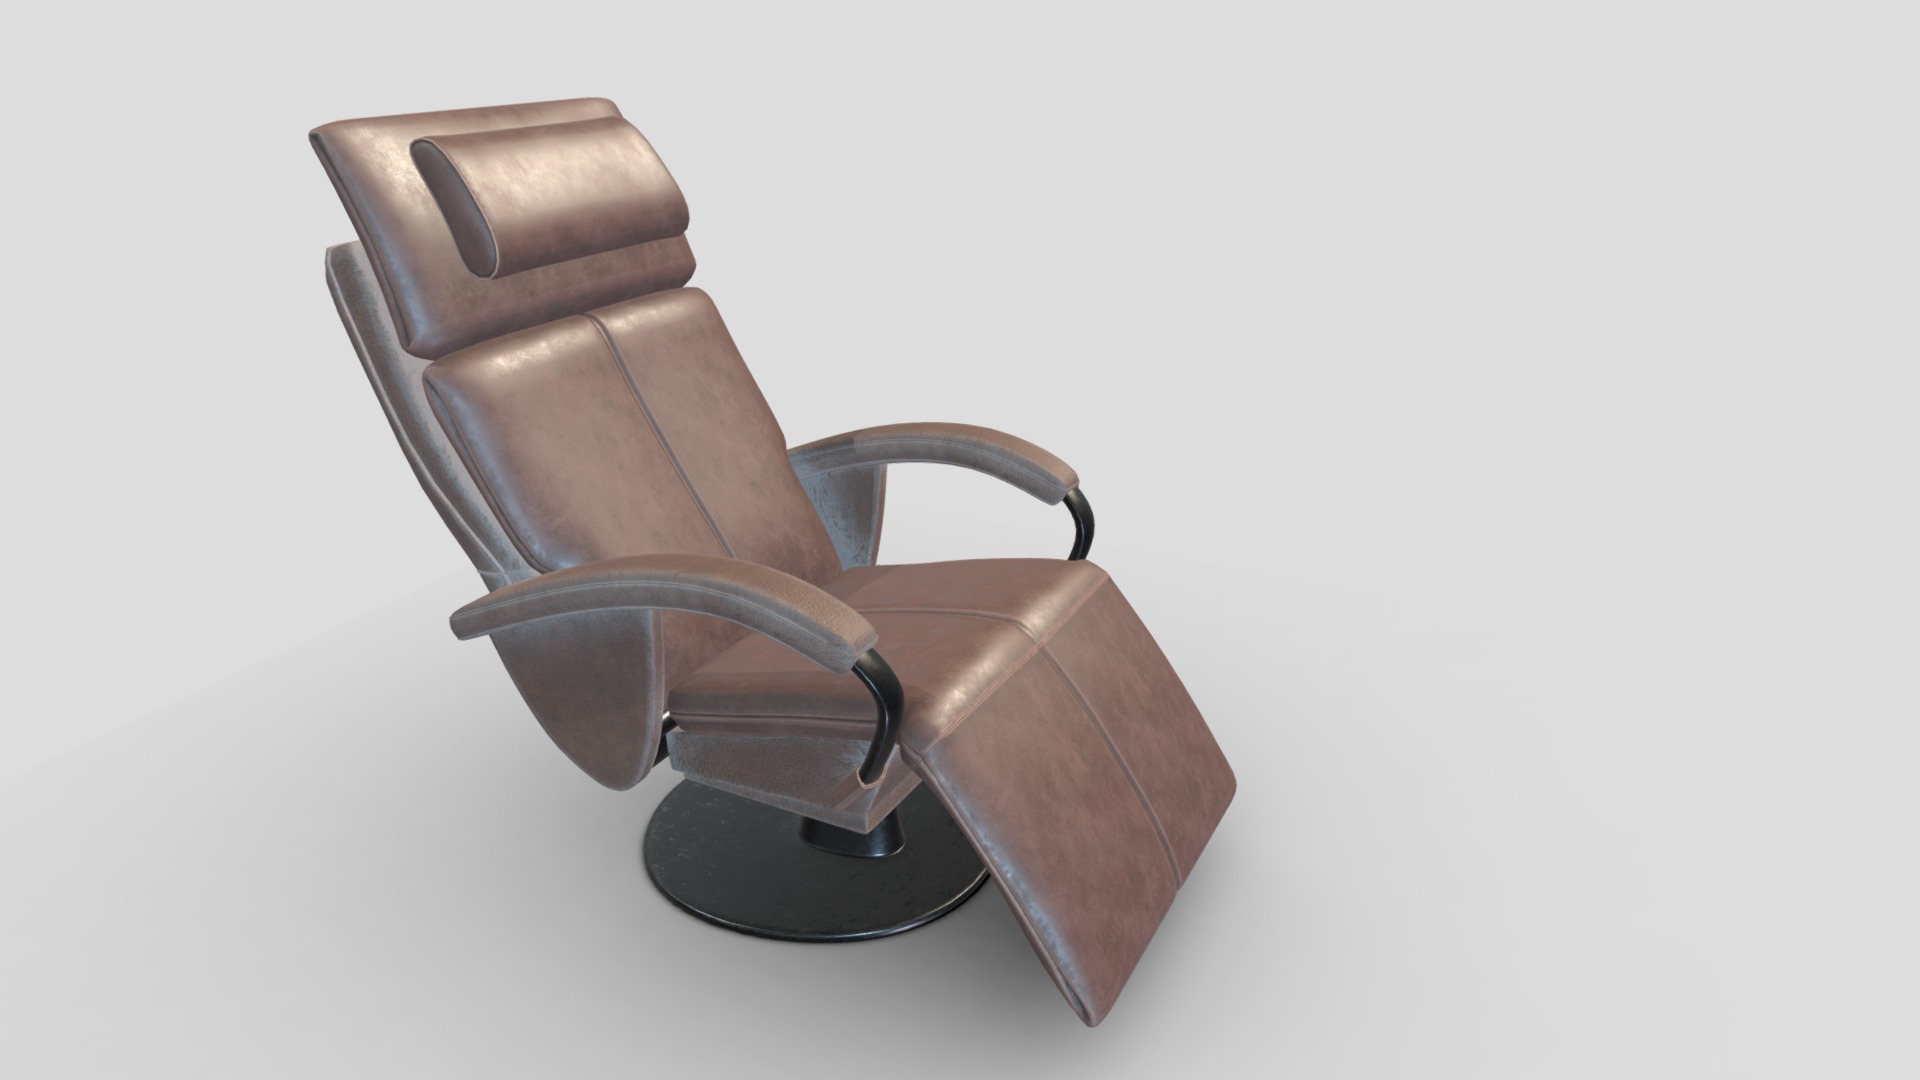 3D model Arm Chair  20 - This is a 3D model of the Arm Chair  20. The 3D model is about a brown leather chair.